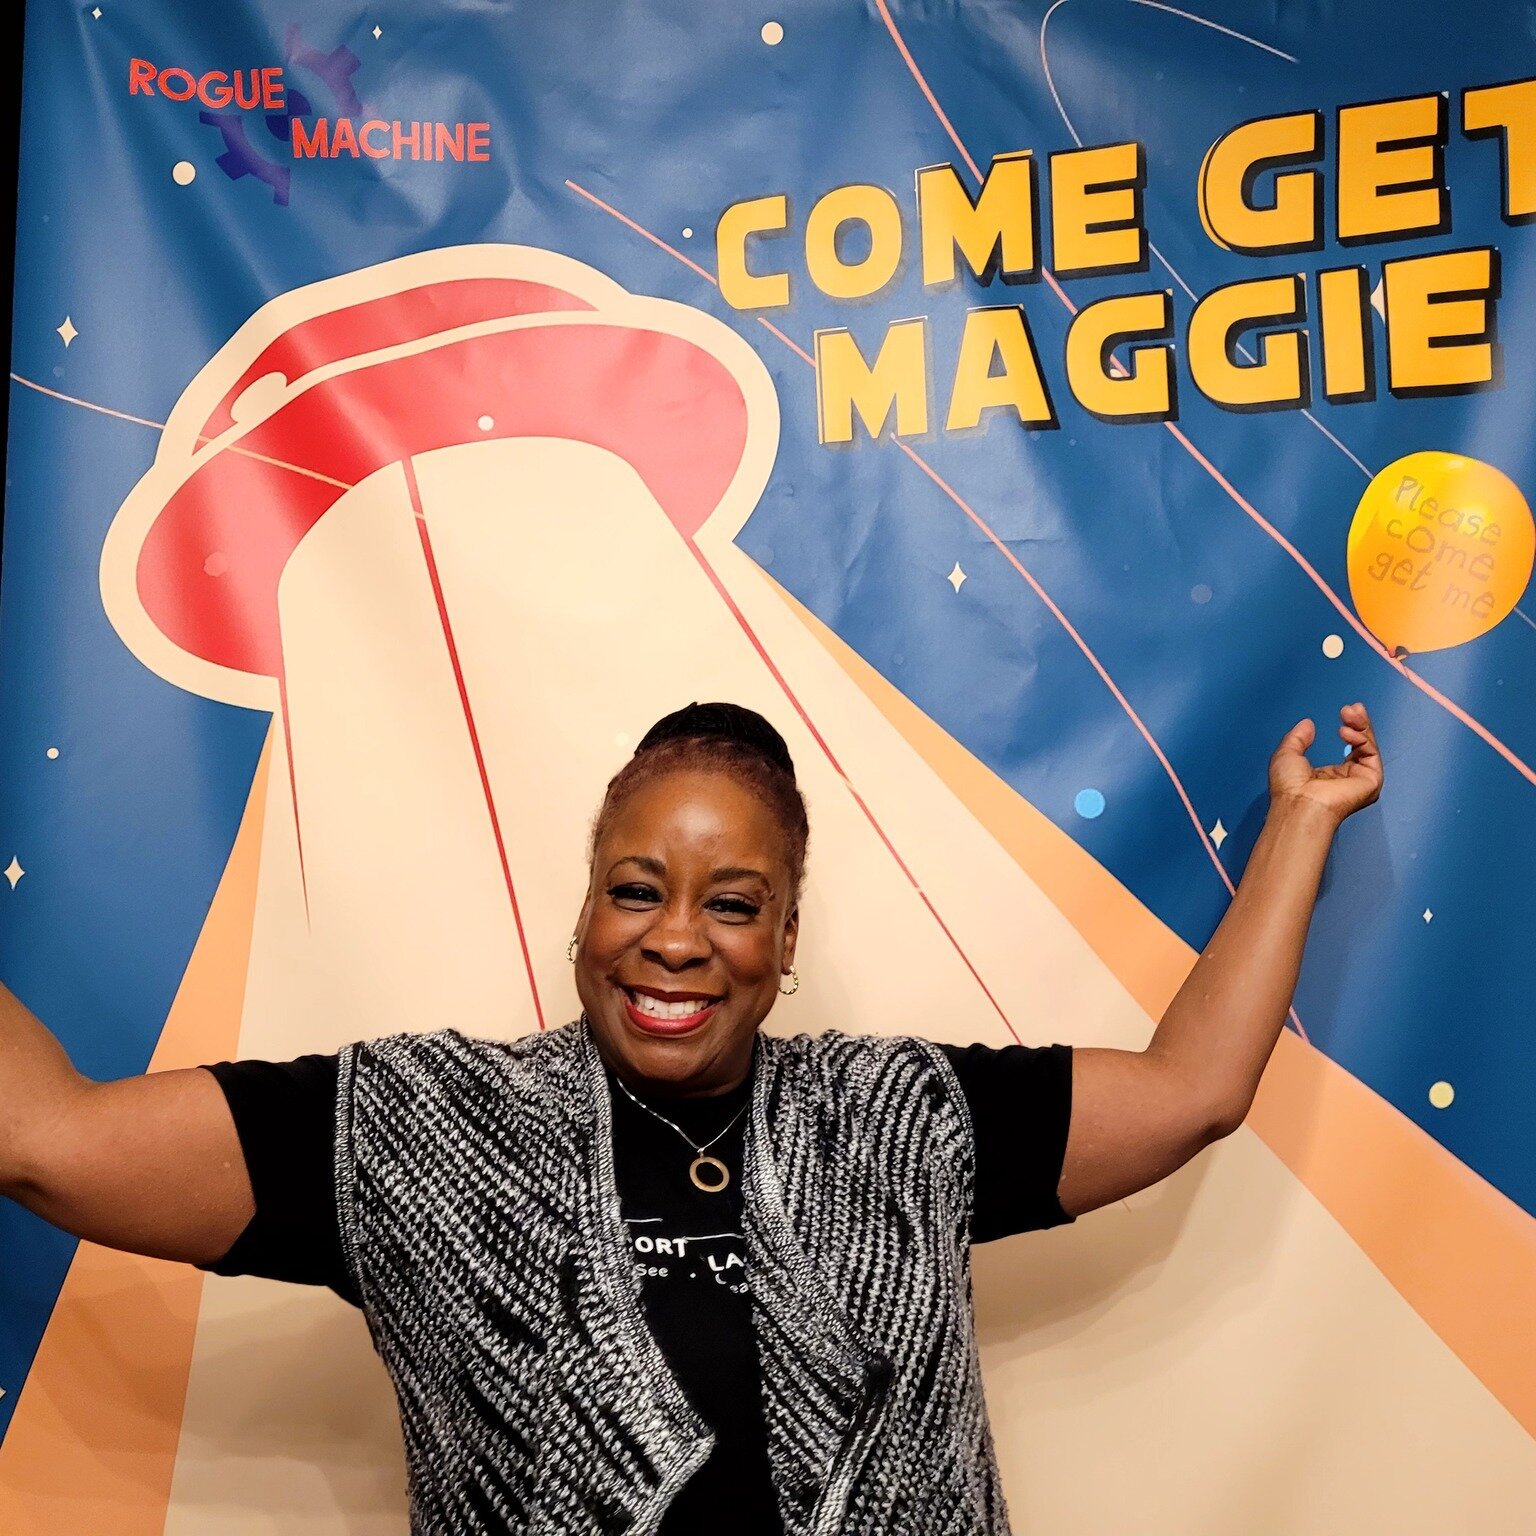 A night of &quot;step and repeat&quot; photo ops for our lovely cast and director! We're feeling all the love tonight!

Don't miss out! Tix at RogueMachine.Ludus.com 🛸👽🚀

#ComeGetMaggie #ComeGetMaggieMusical #musicaltheatre #musical #theatre #musi